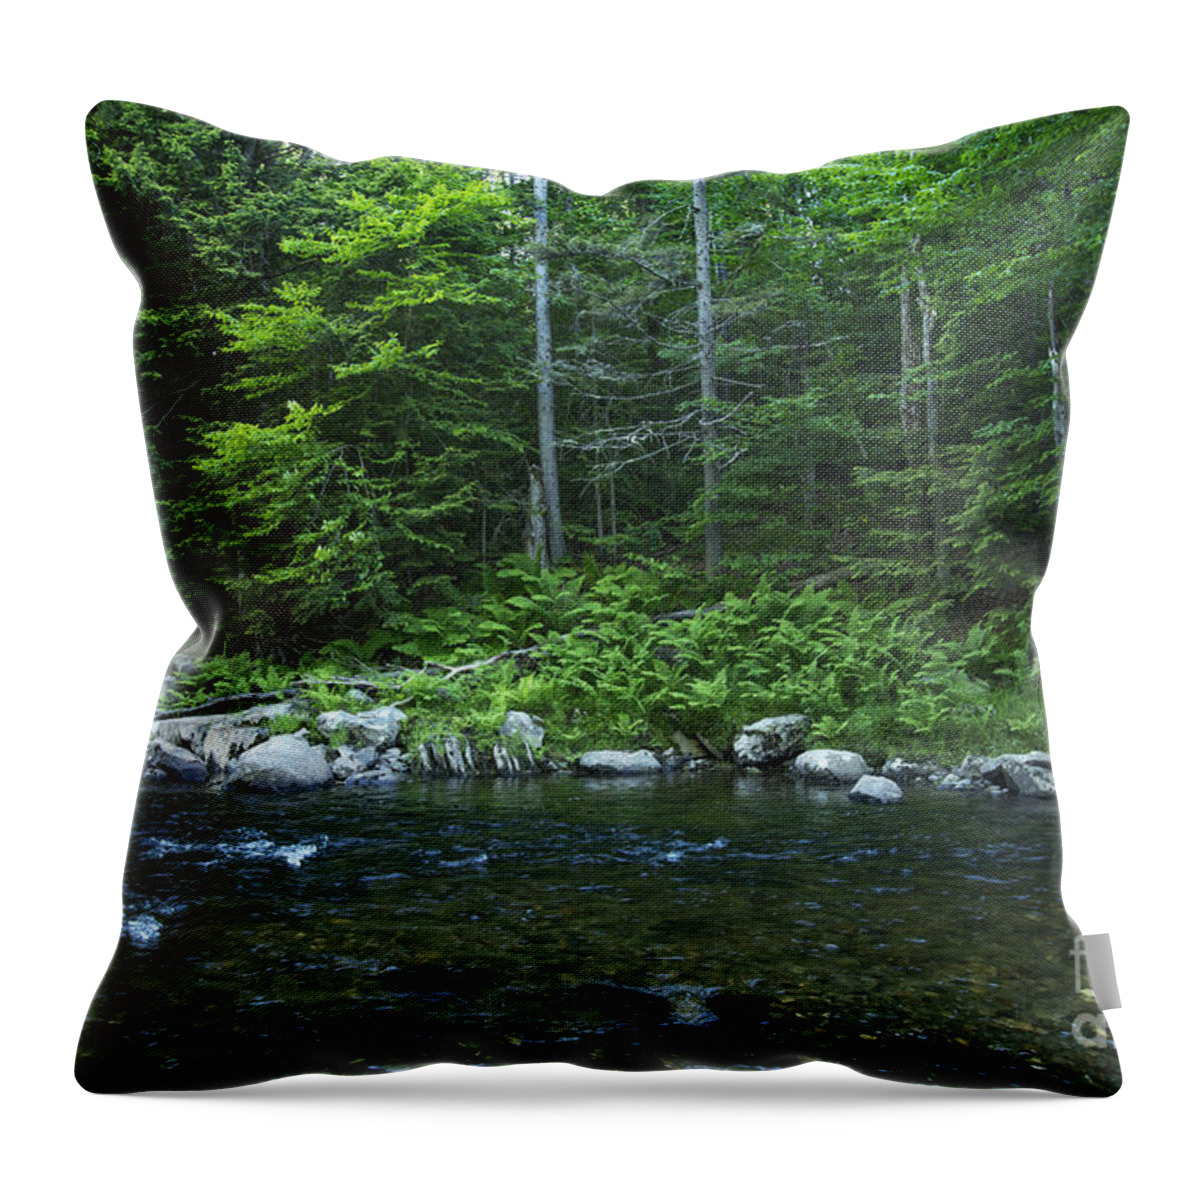 June Throw Pillow featuring the photograph Temple Stream by Alana Ranney